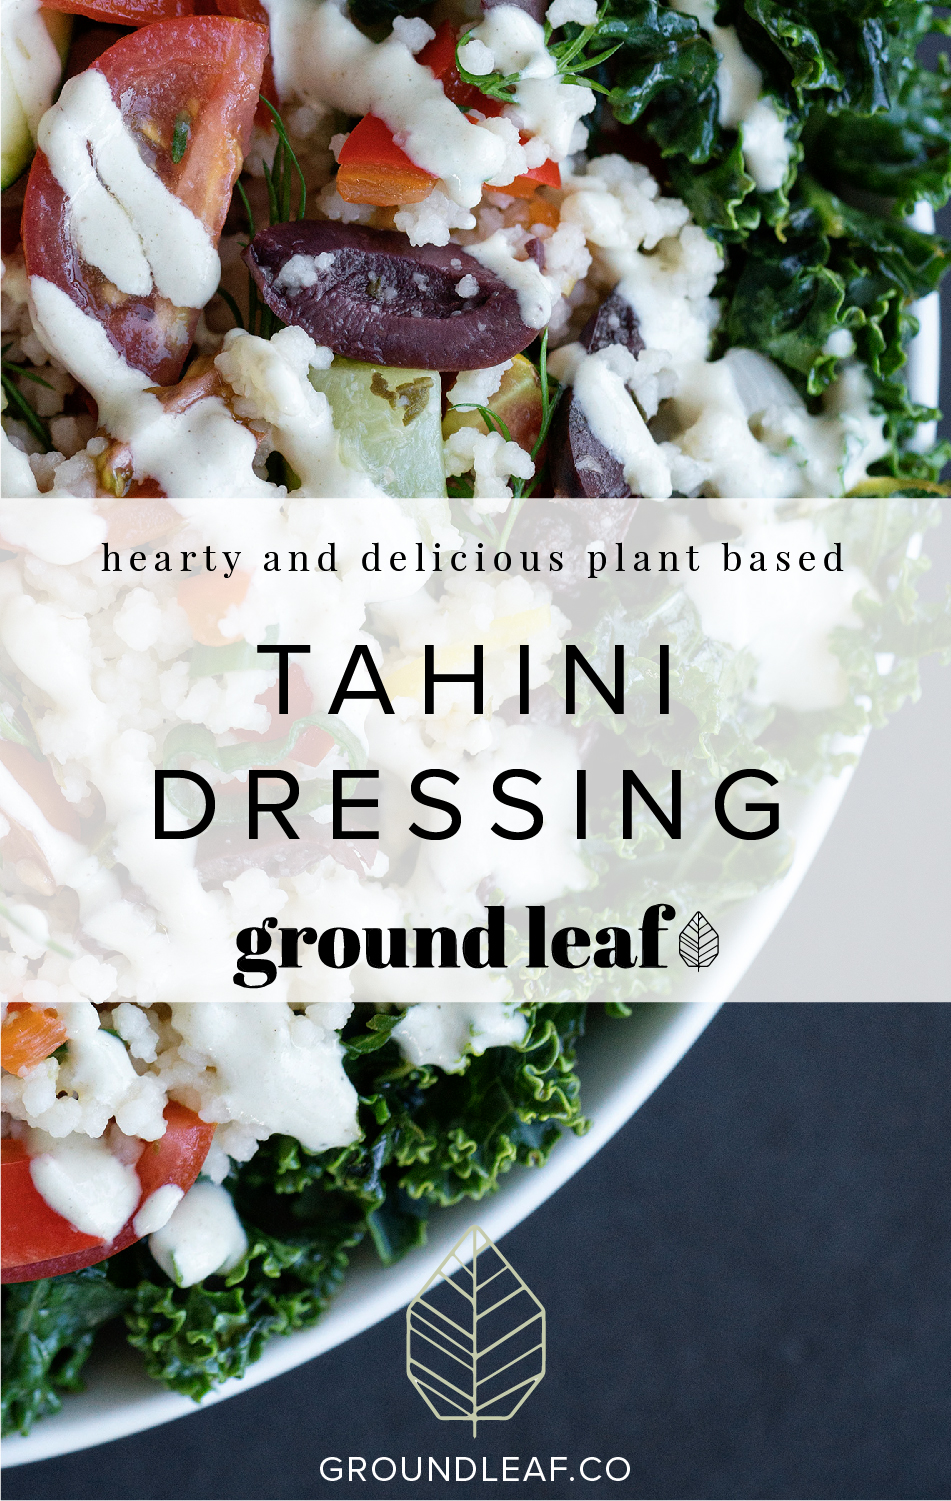 Oil-free Tahini Dressing brought to you by Zucchini Puree (which replaces the oil in a fat free way, without sacrificing the flavor). A delightfully tangy dressing to be used on salads, veggies, anything you can think of! 